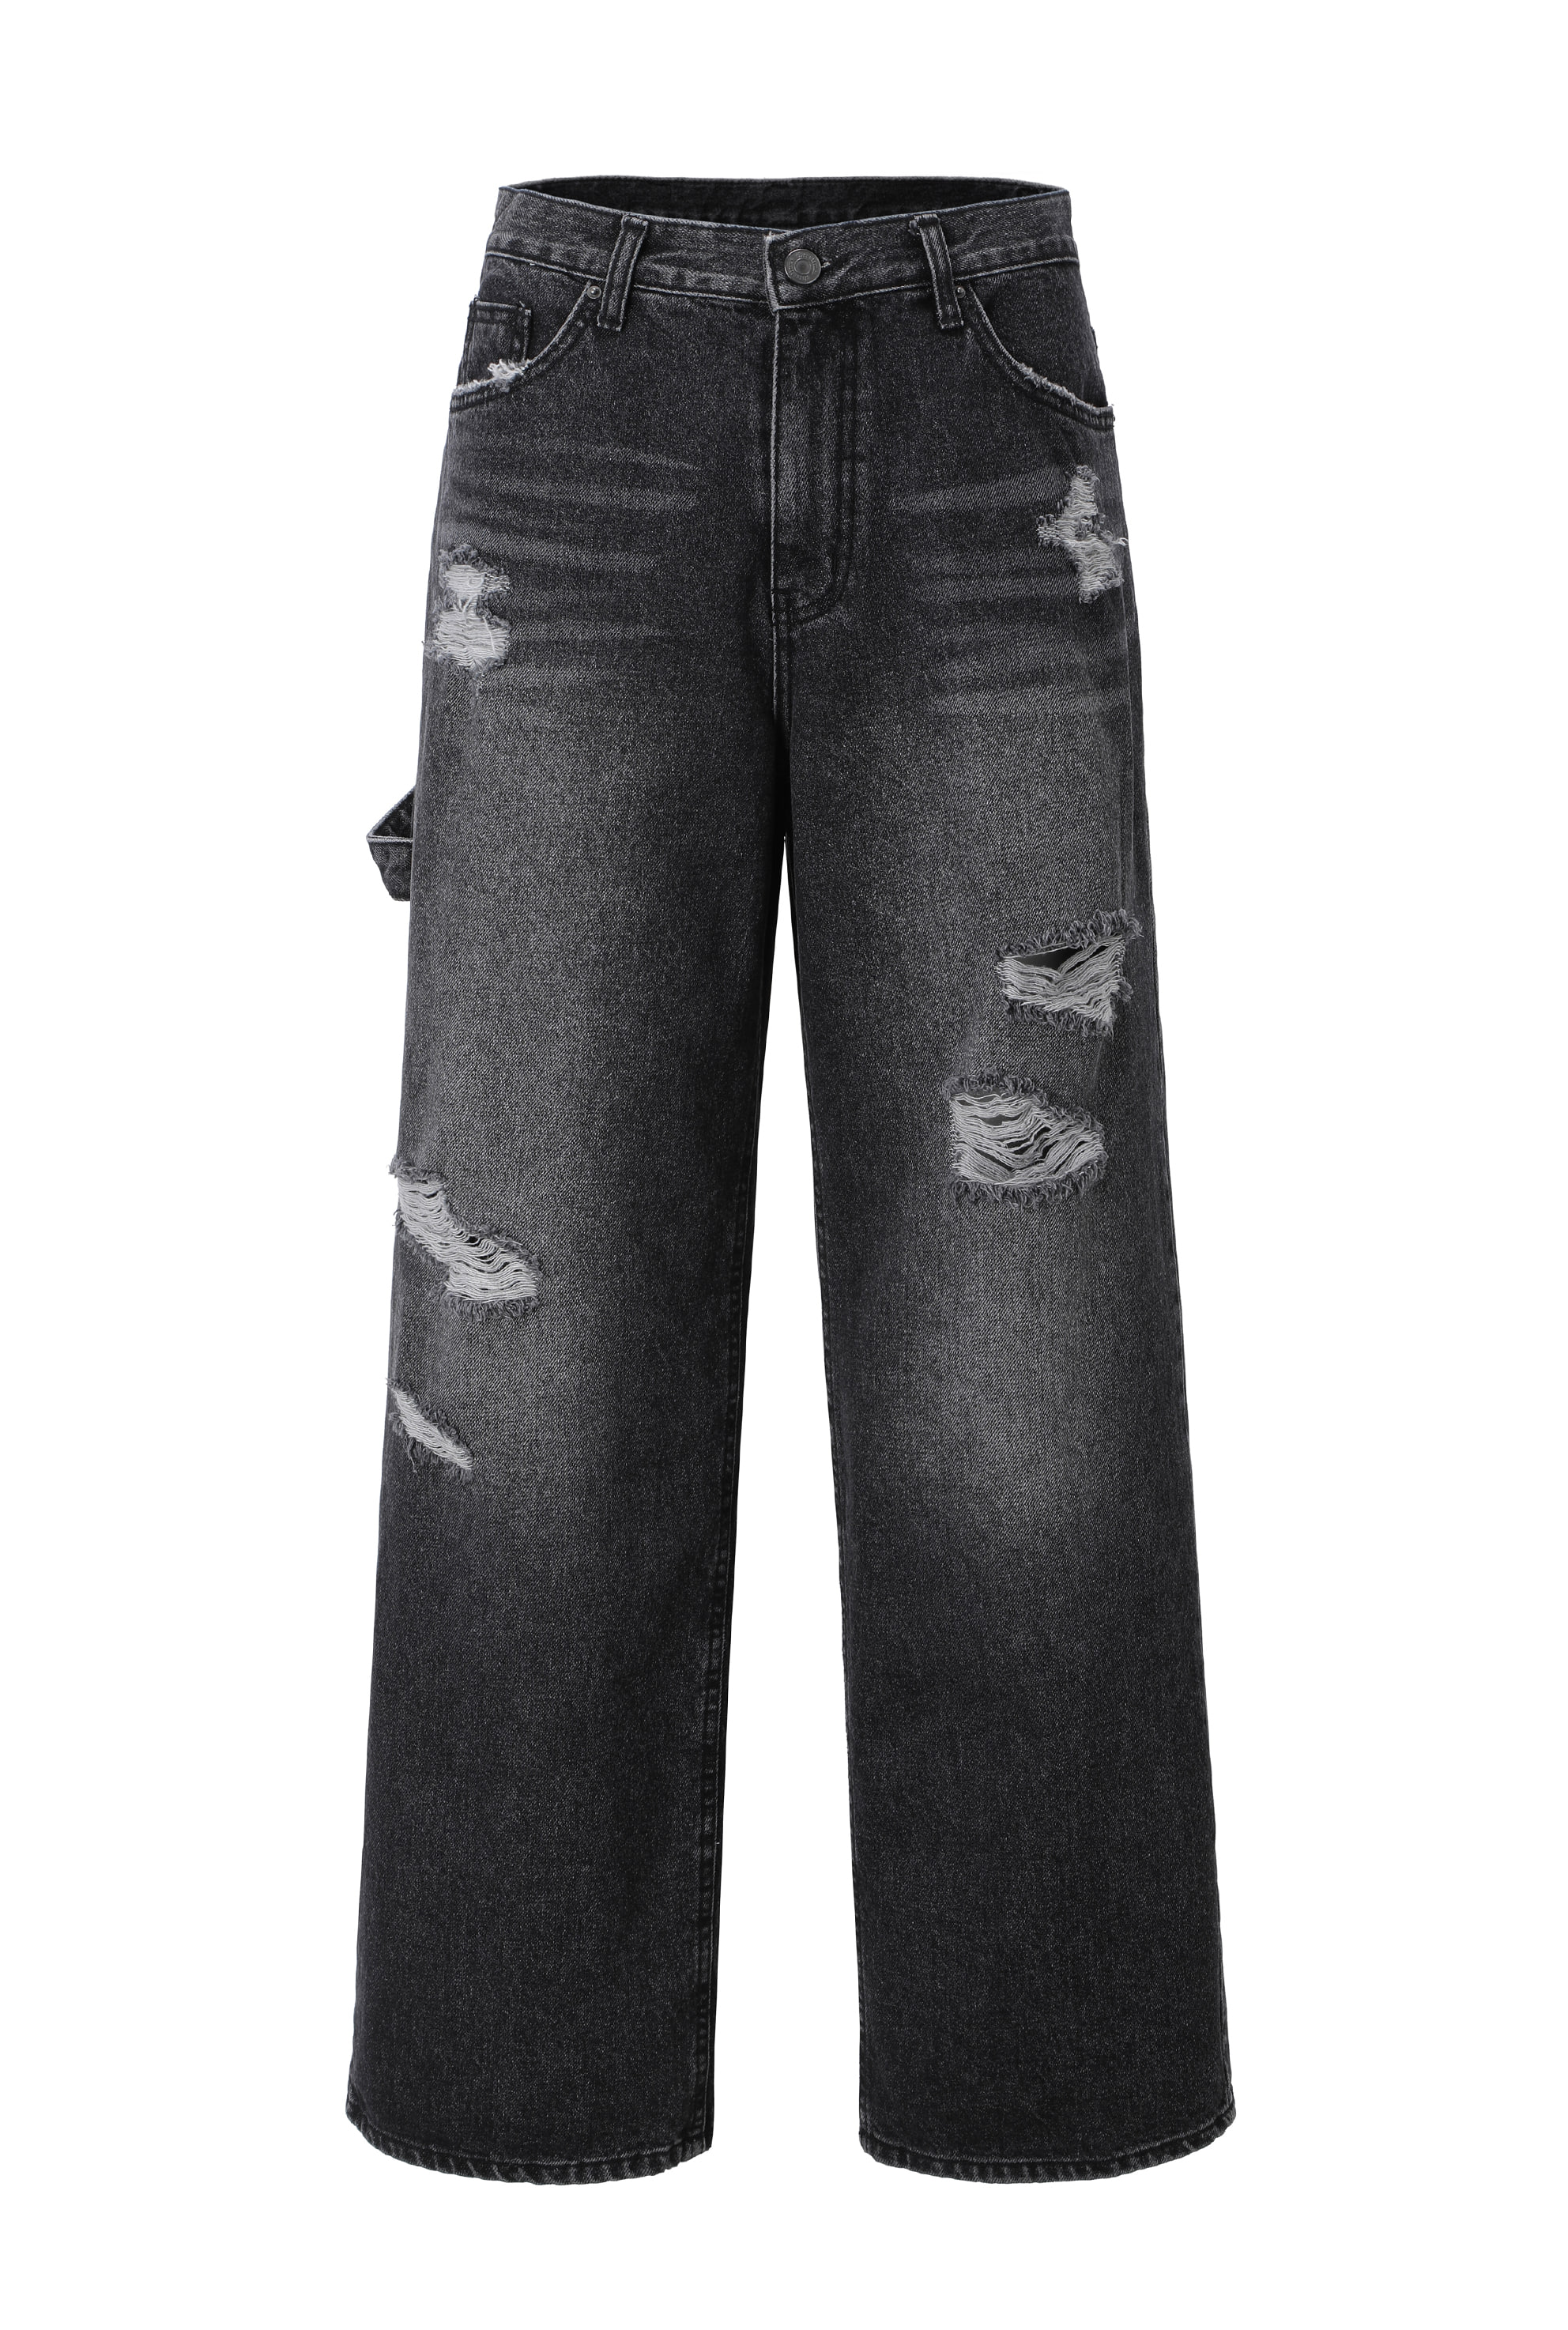 5532 Brushed jeans